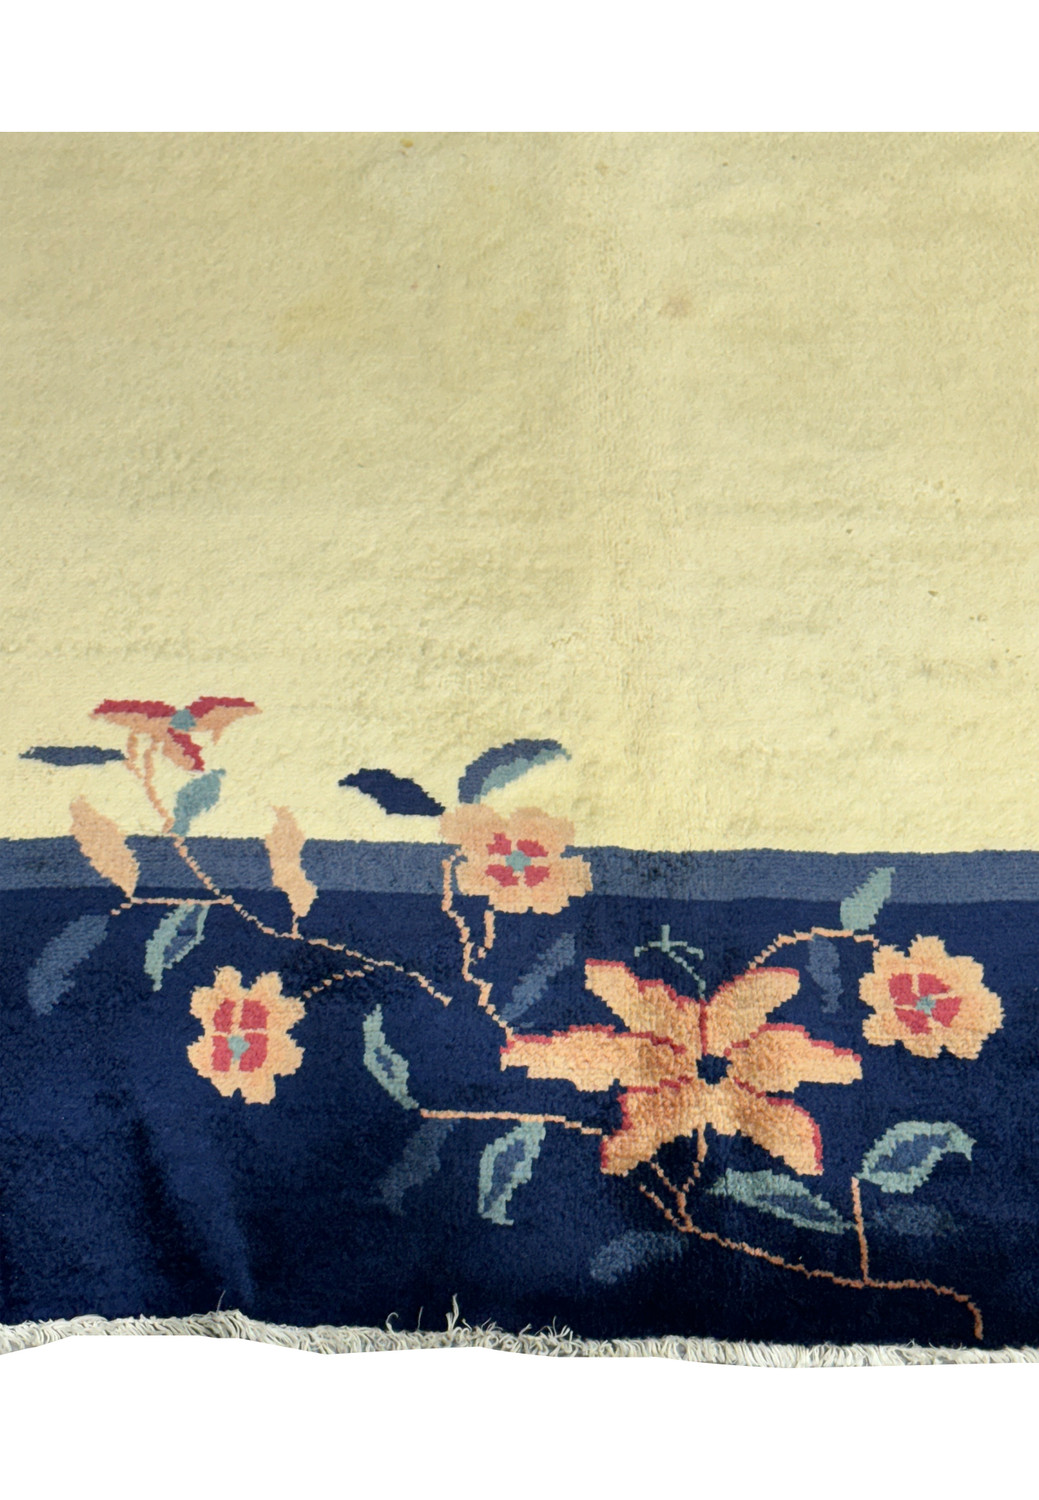 Detailed close-up of the navy blue border and corner floral designs on a vintage Art Deco rug against a beige field